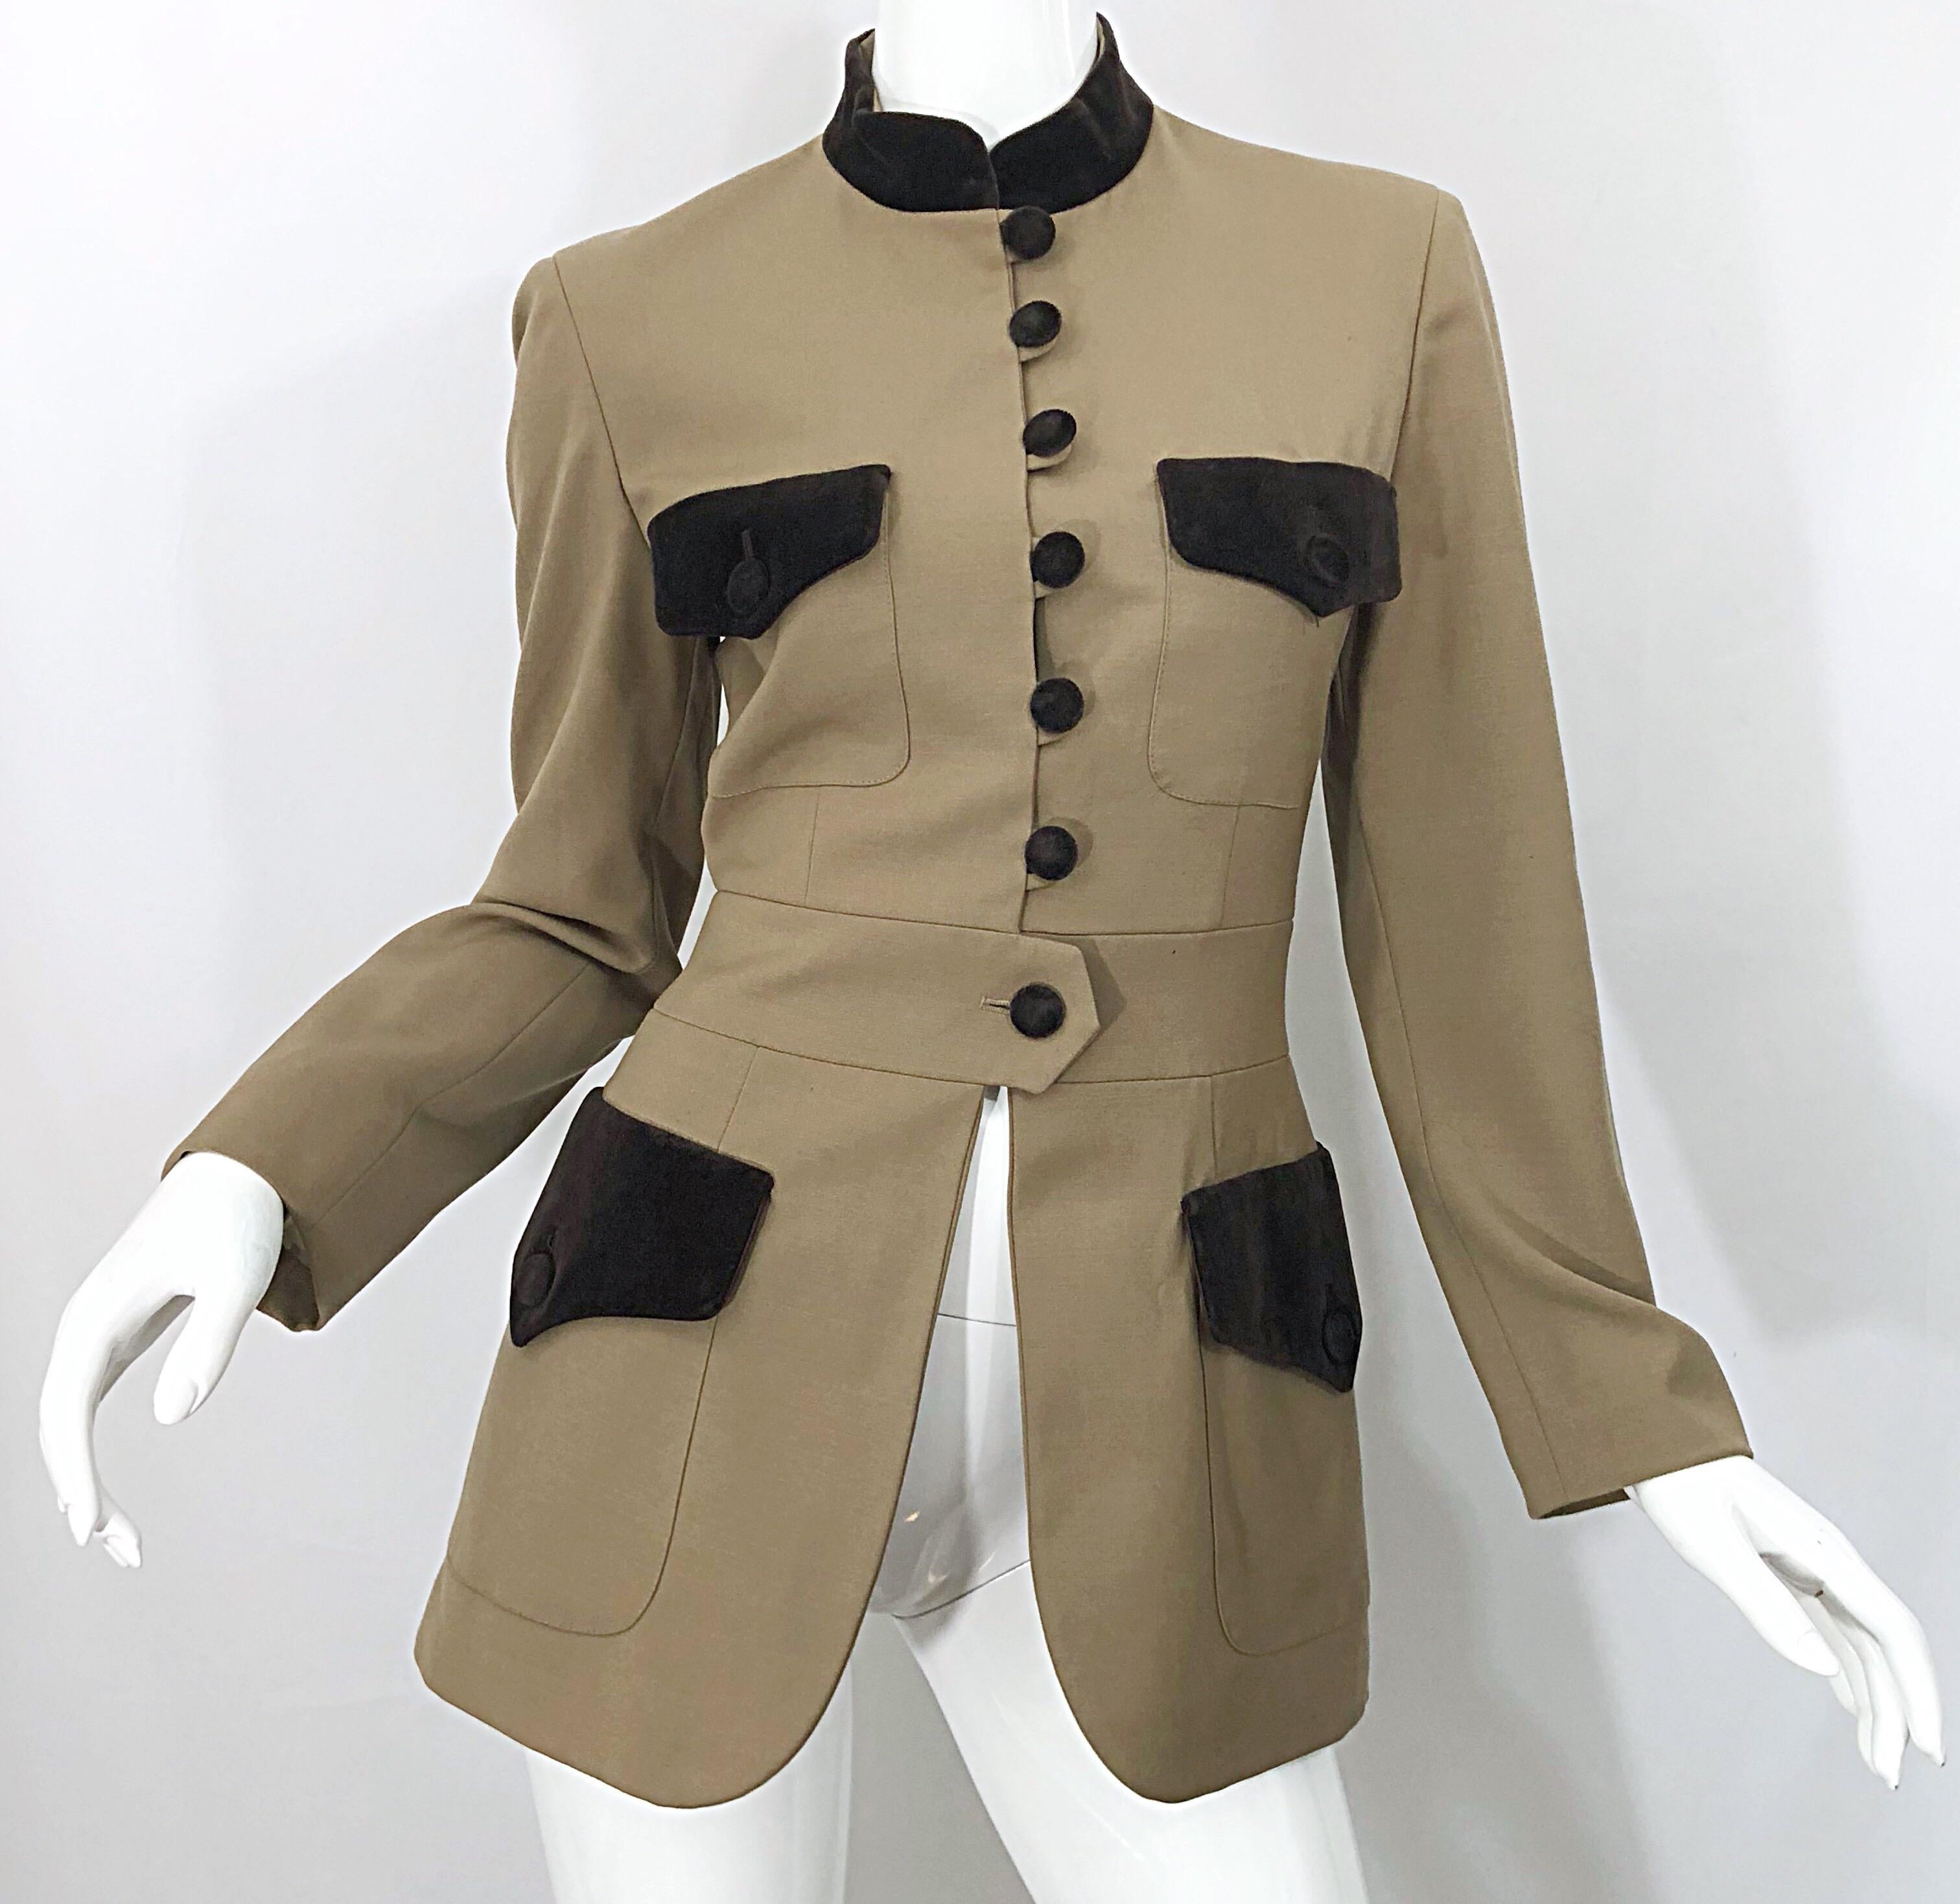 1990s Moschino Cheap & Chic Sz 8 Tan Brown Military Band Inspired Vintage Jacket For Sale 2